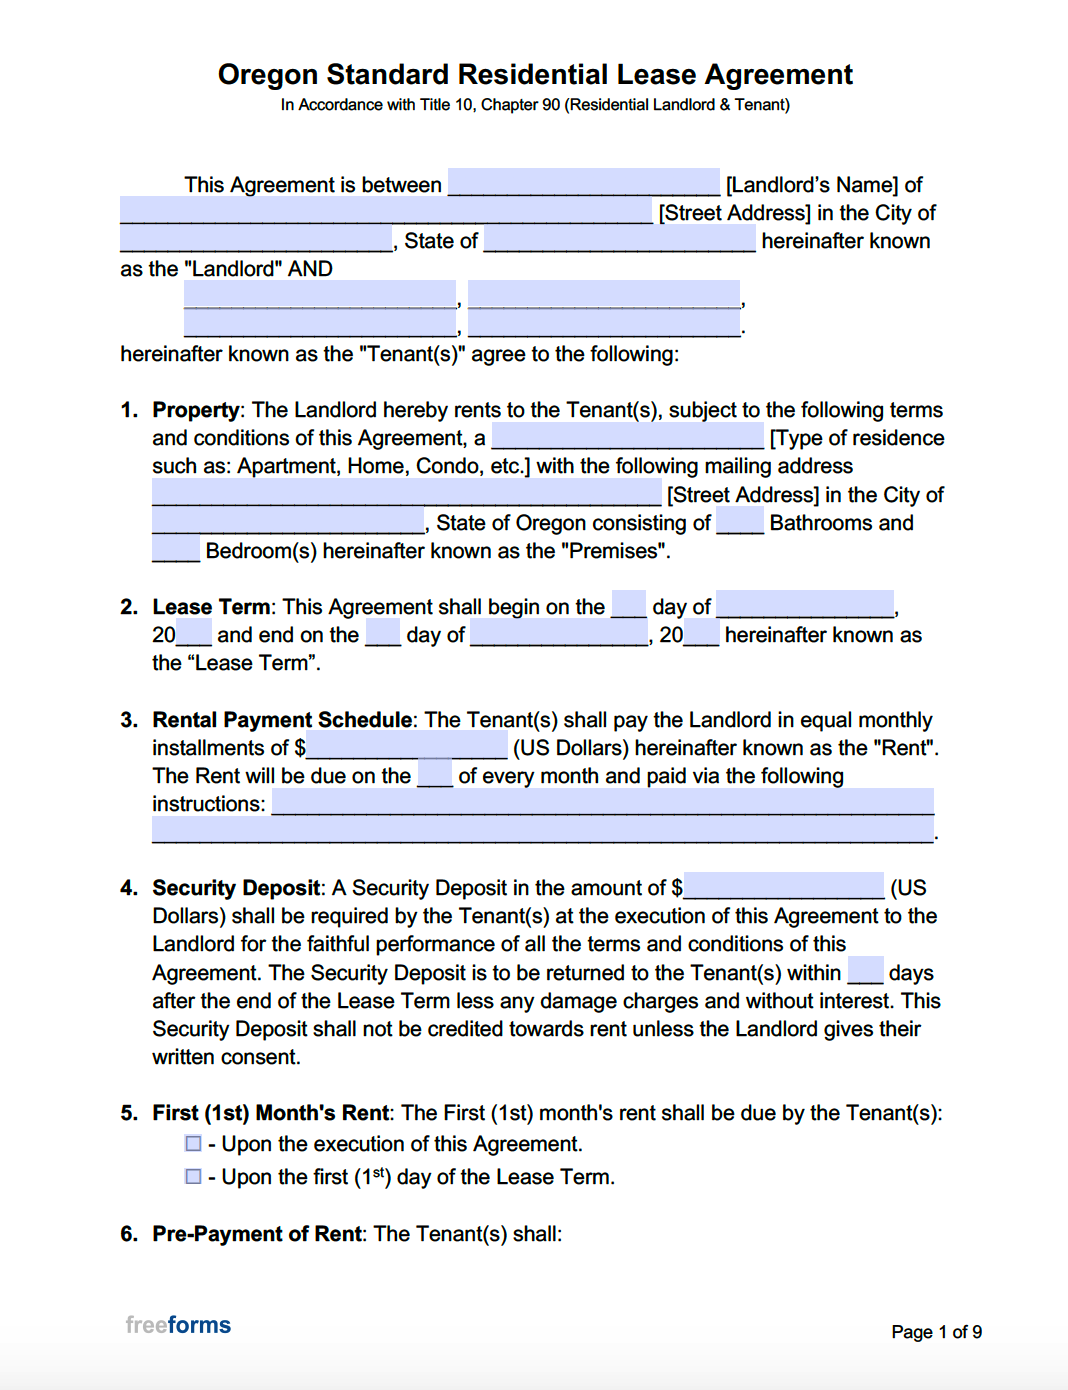 Free Oregon Standard Residential Lease Agreement Template PDF WORD